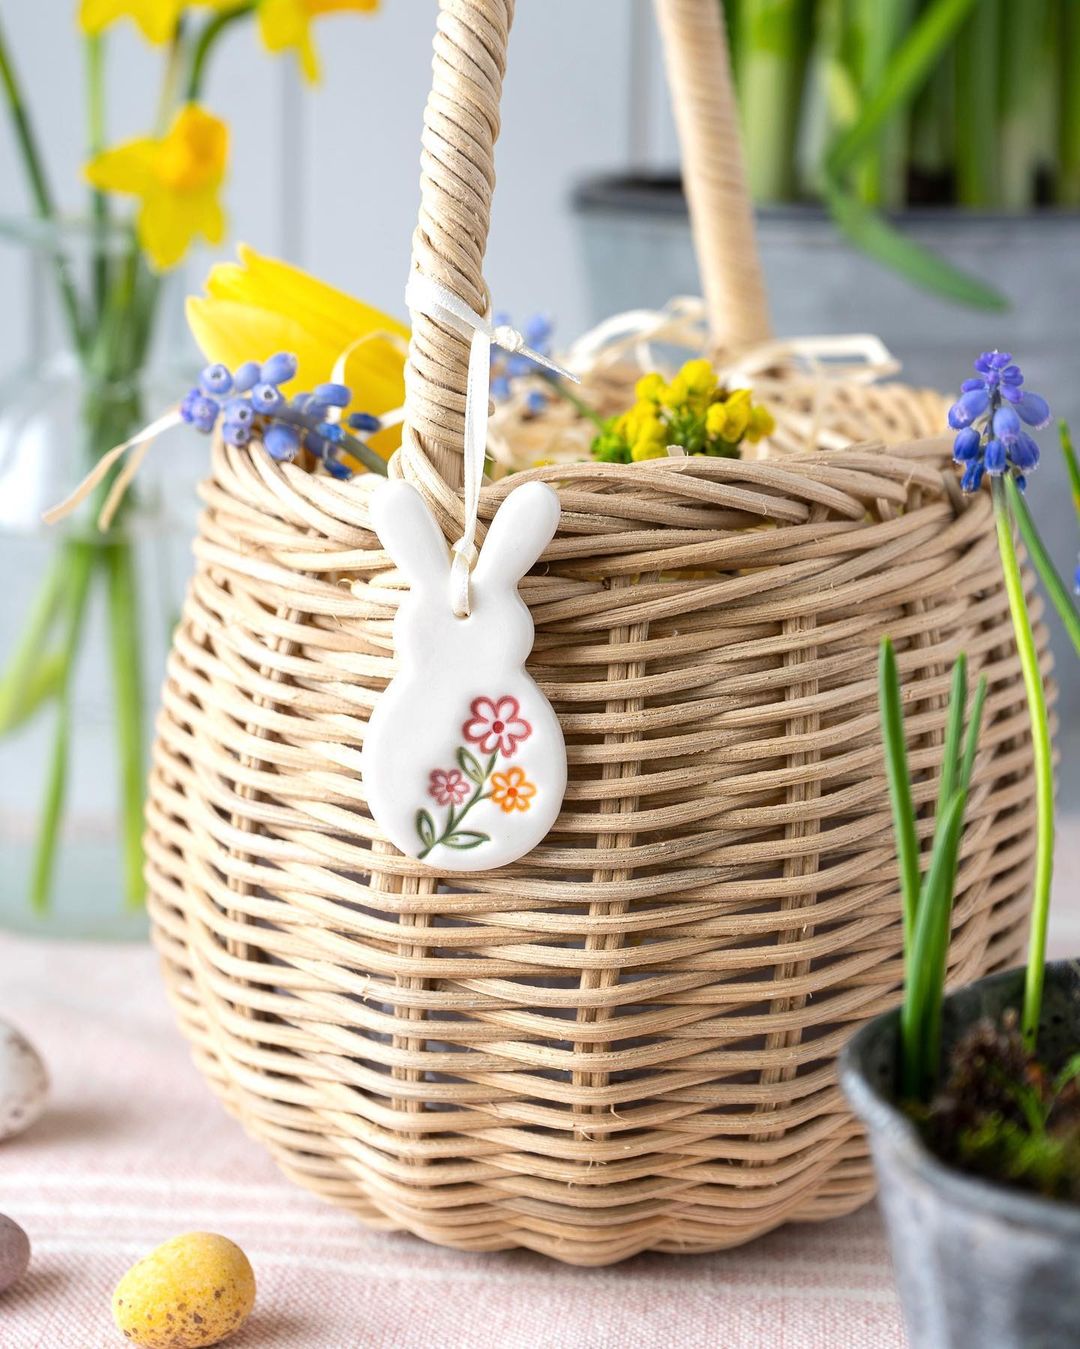 Totally Cool Easter Basket Ideas for Teens ...